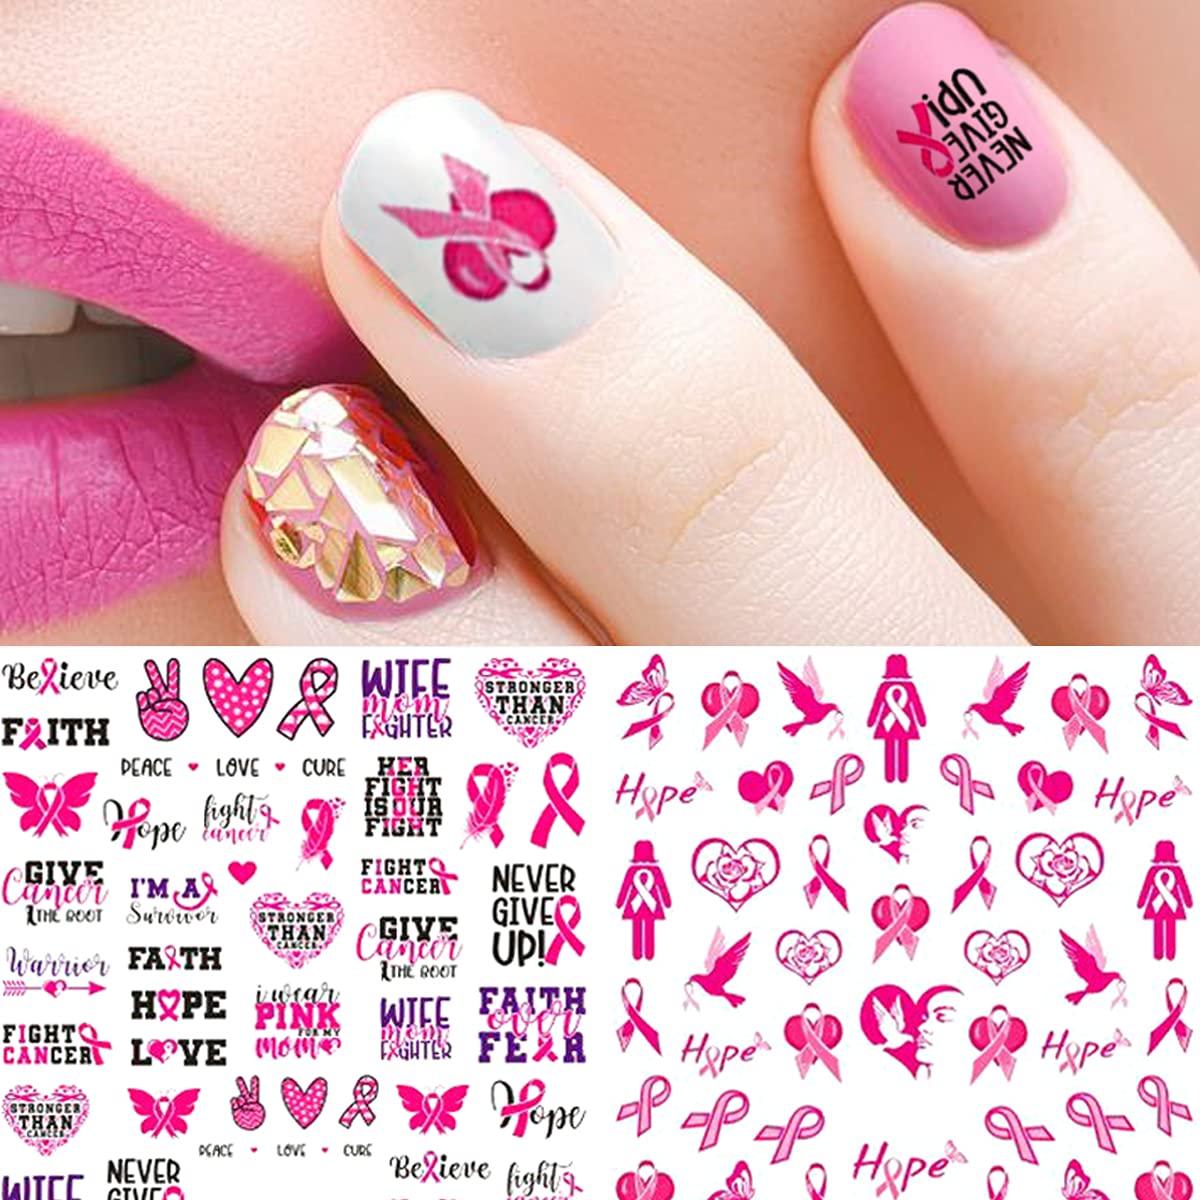 Pink Ribbon Breast Cancer Awareness Stickers 100 Pack - High Quality Full  Color